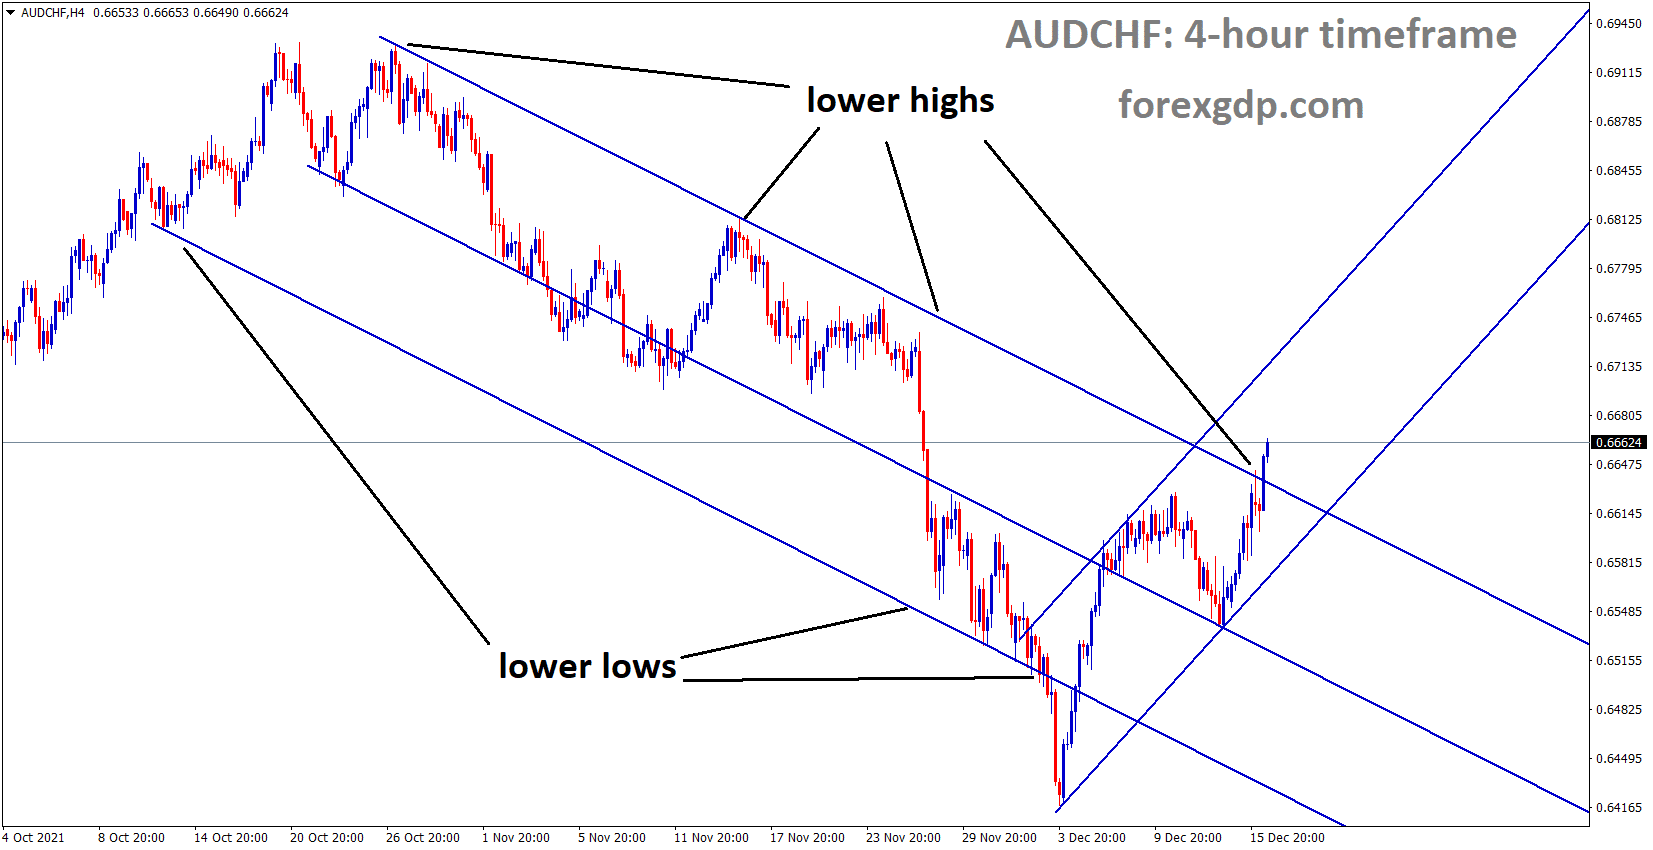 AUDCHF is moving in the Descending channel and the market reached the lower high area of the Channel